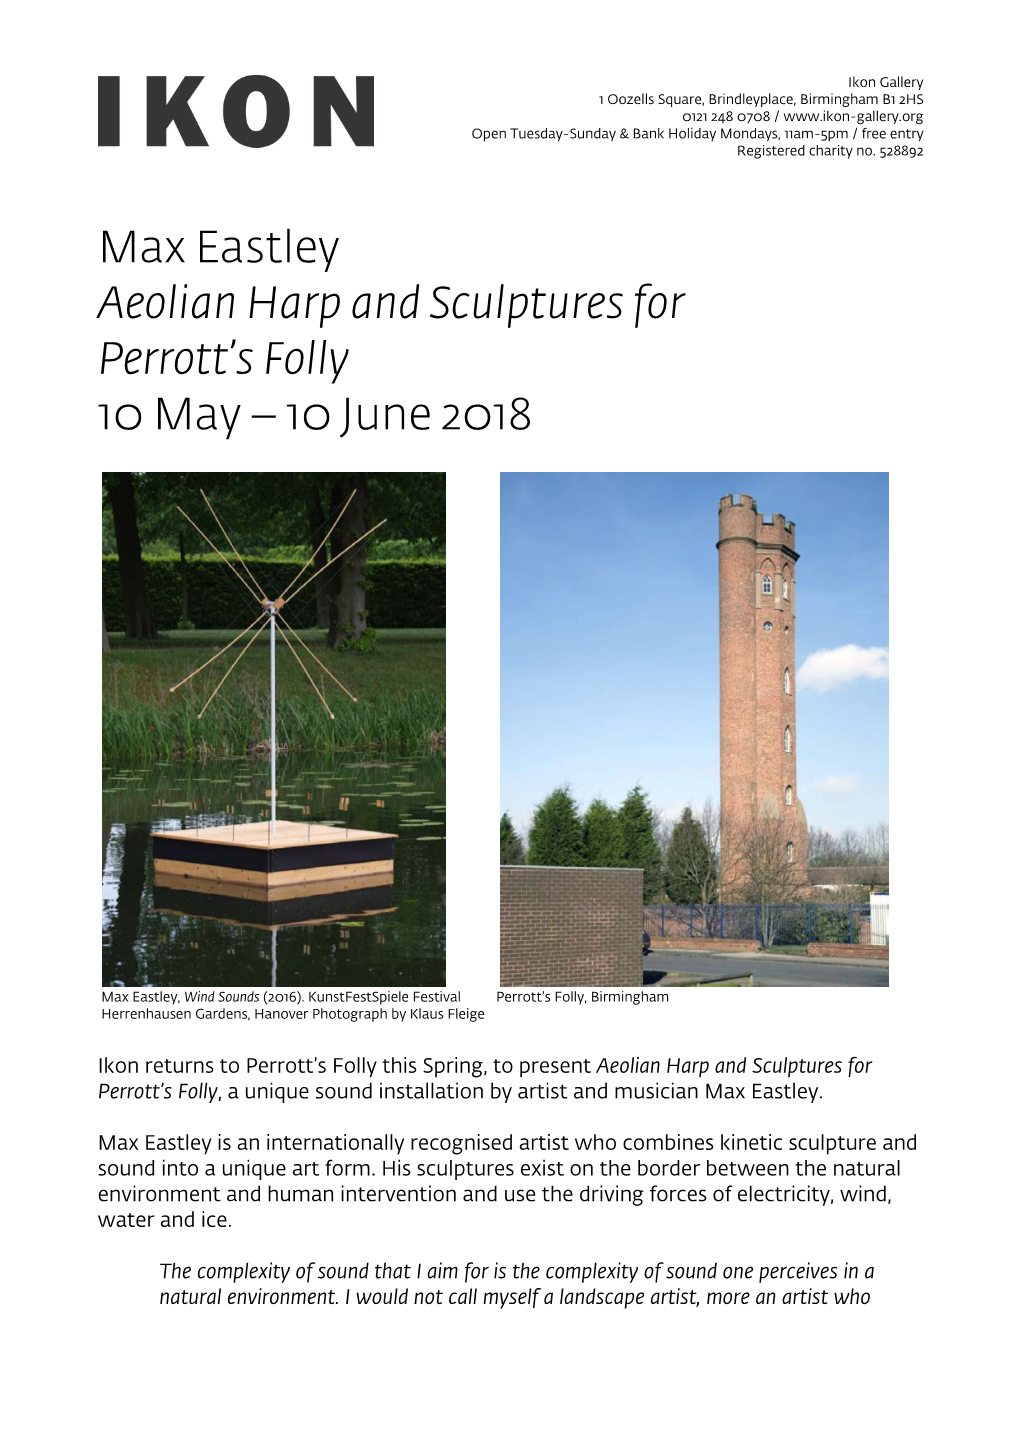 Max Eastley Aeolian Harp and Sculptures for Perrott's Folly 10 May